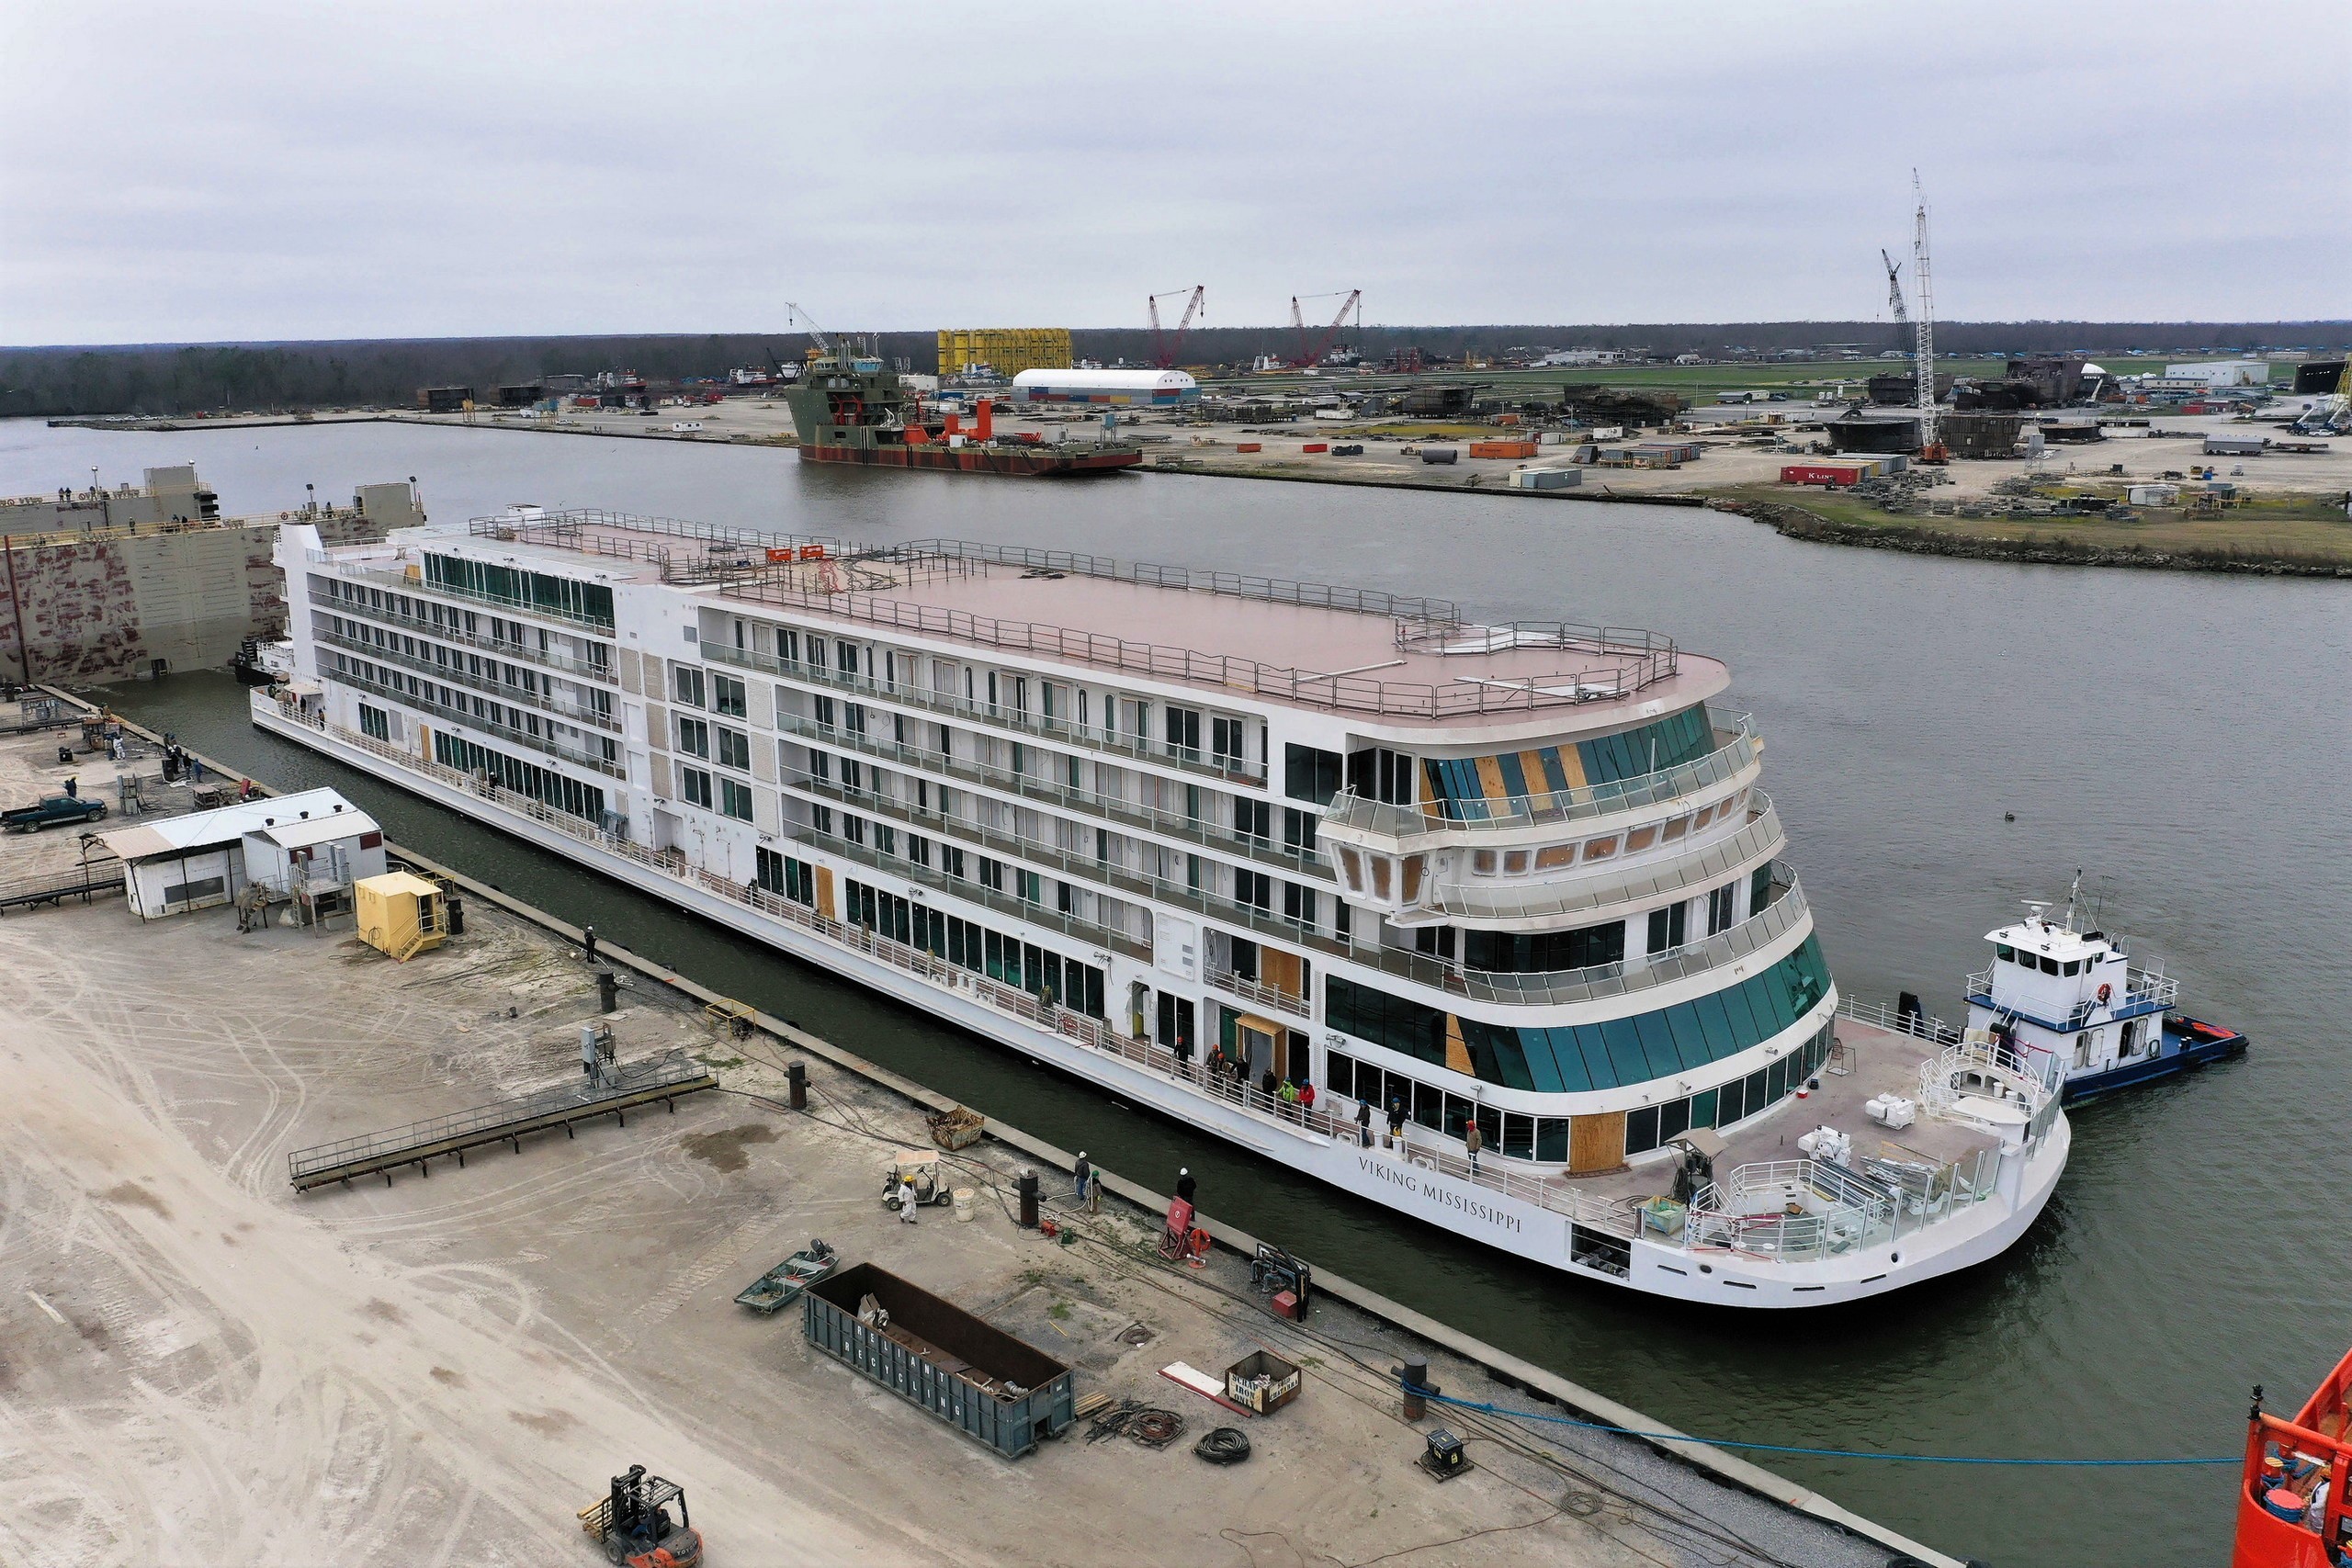 450-Foot Viking Mississippi Cruise Ship Hits the Water in Louisiana.